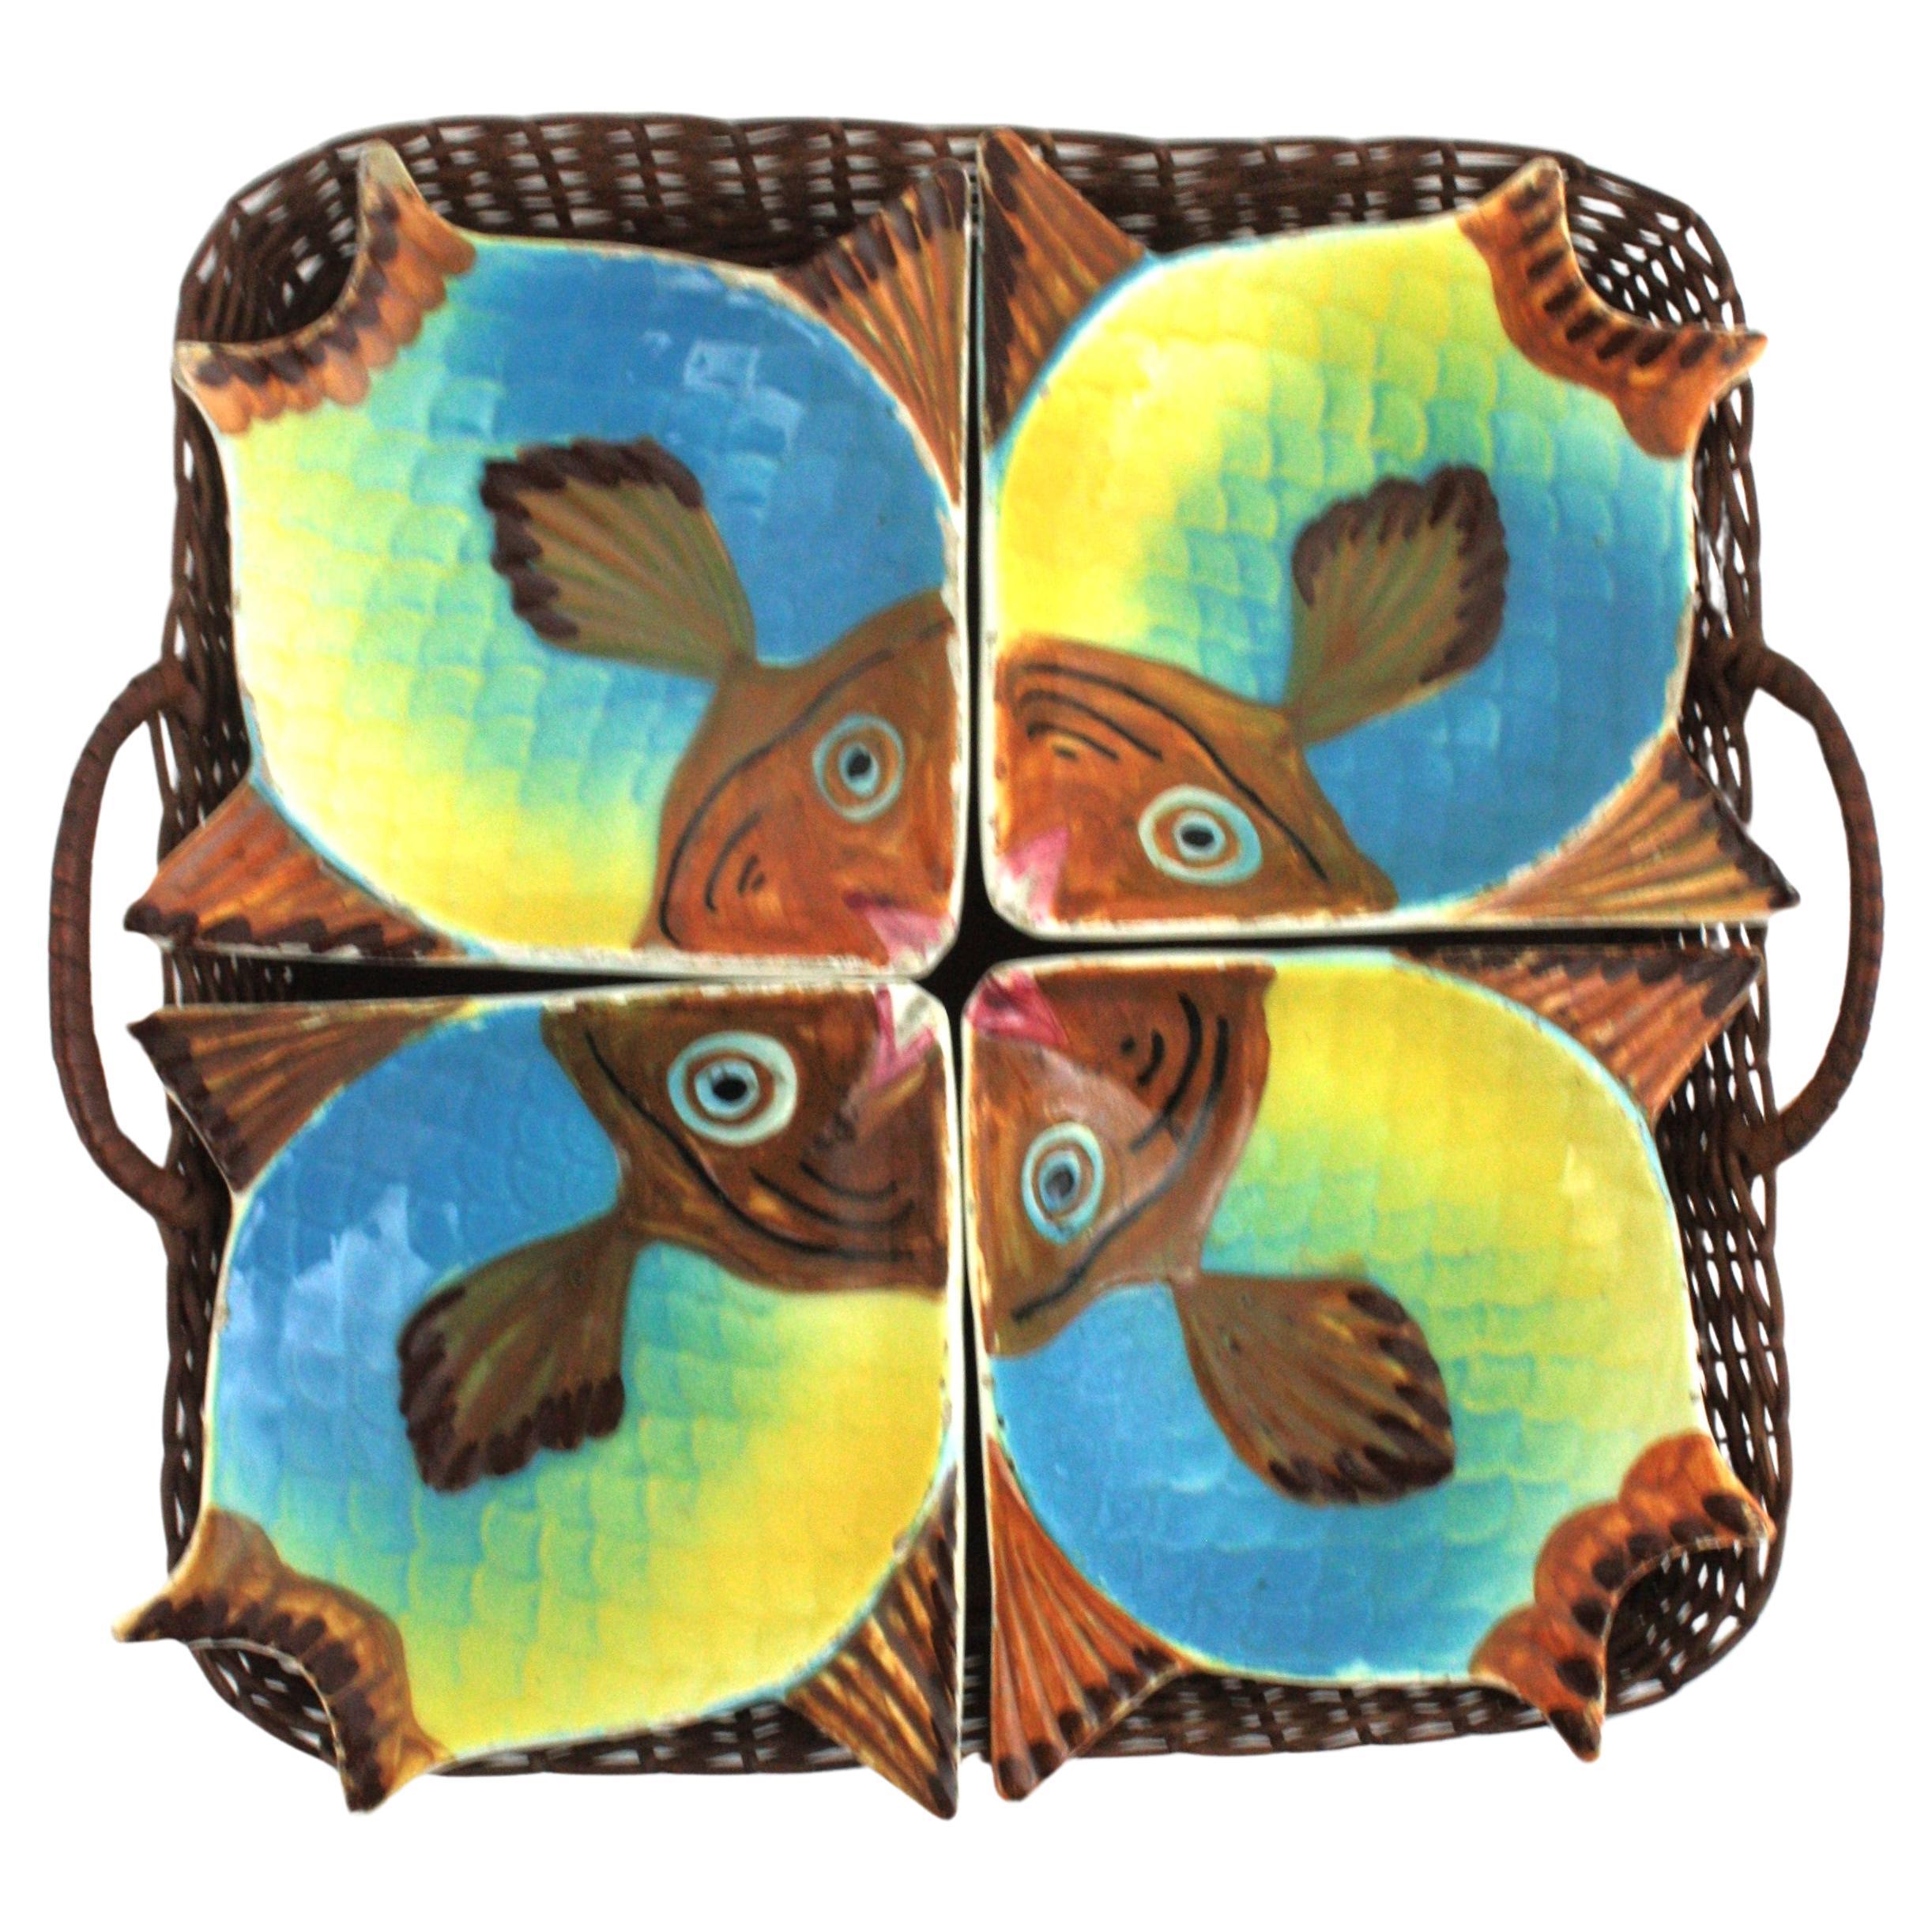 Eye-catching set of 4 small fish shaped bowls on a rattan serving tray, Spain, 1950s
The set is comprised by: 
4 colorful hand-painted ceramic fish dishes
1 hand-woven rattan basket tray
Manufacturer's marks underneath.
On sale as a set.
This set